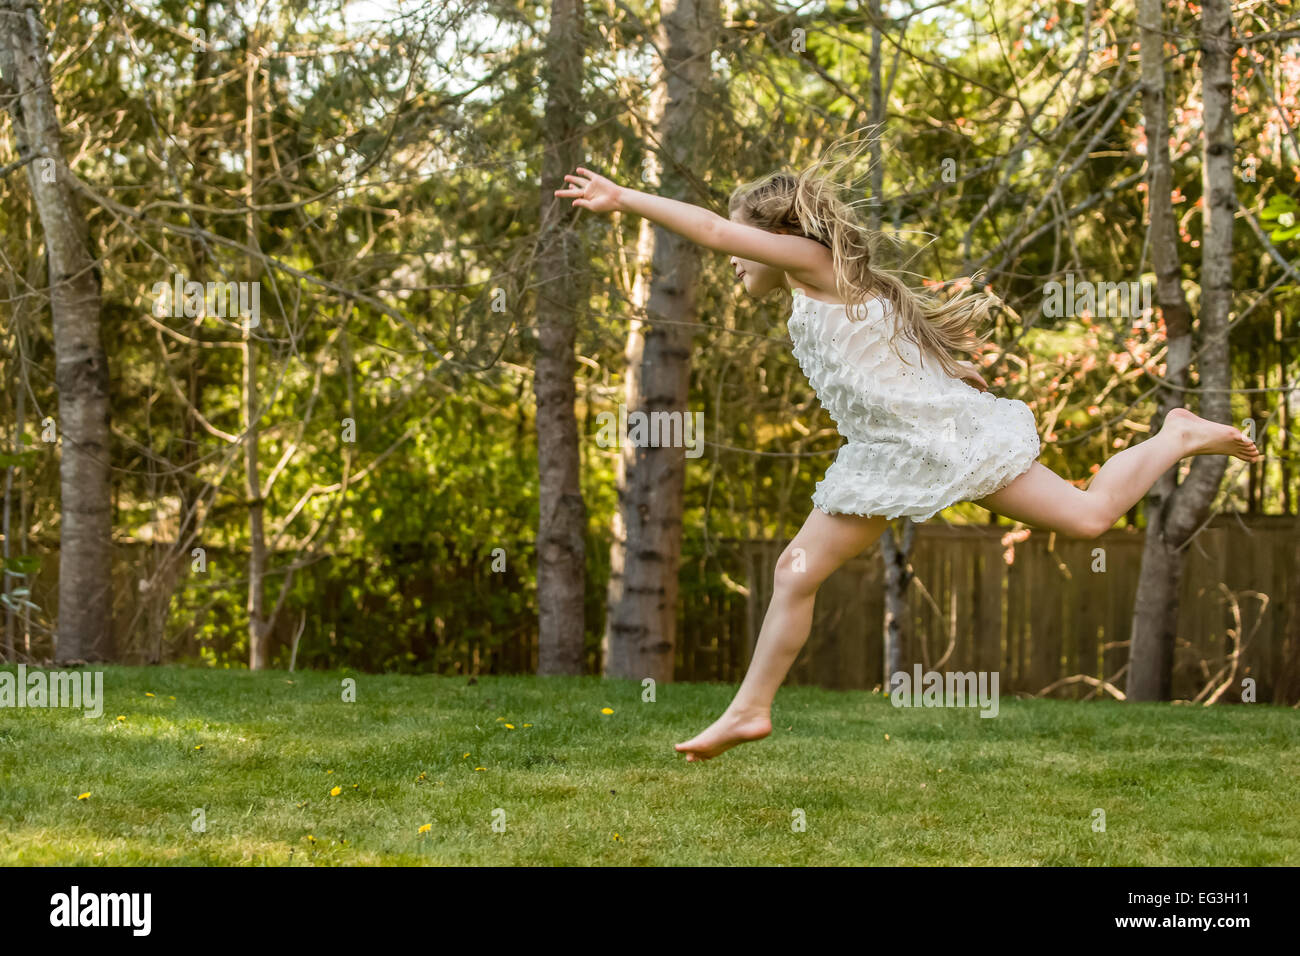 Seven year old girl running and leaping barefoot with great energy and excitement in her backyard in Issaquah, Washington, USA Stock Photo